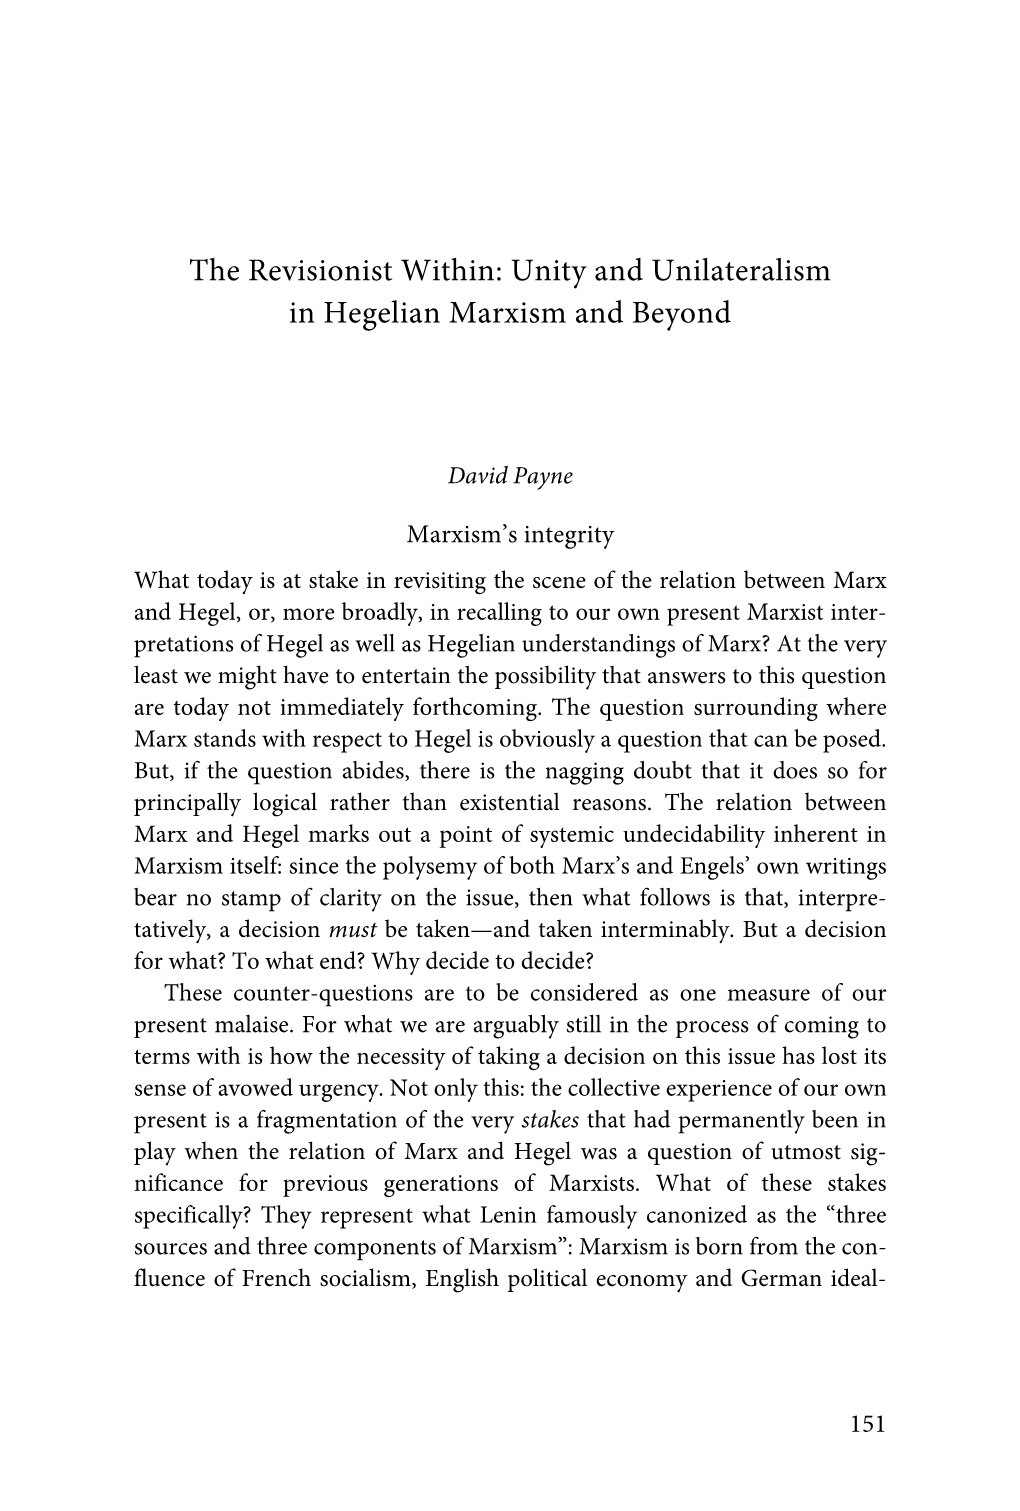 The Revisionist Within: Unity and Unilateralism in Hegelian Marxism and Beyond